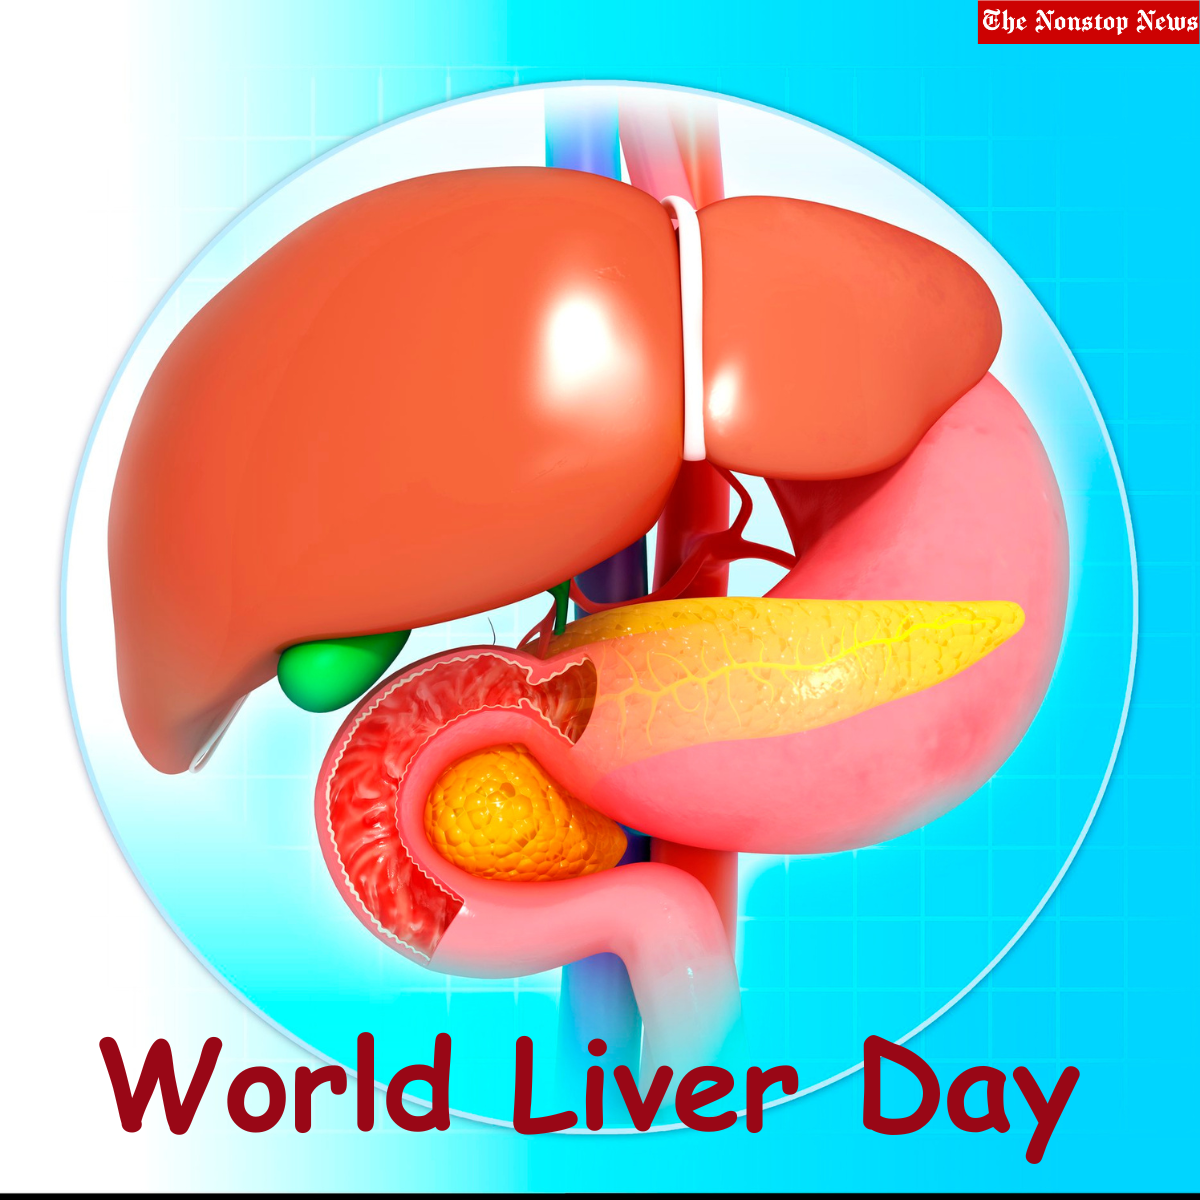 World Liver Day 2023 Quotes, Images, Wishes, Messages, Greetings, Sayings, Posters, Banners, and Captions